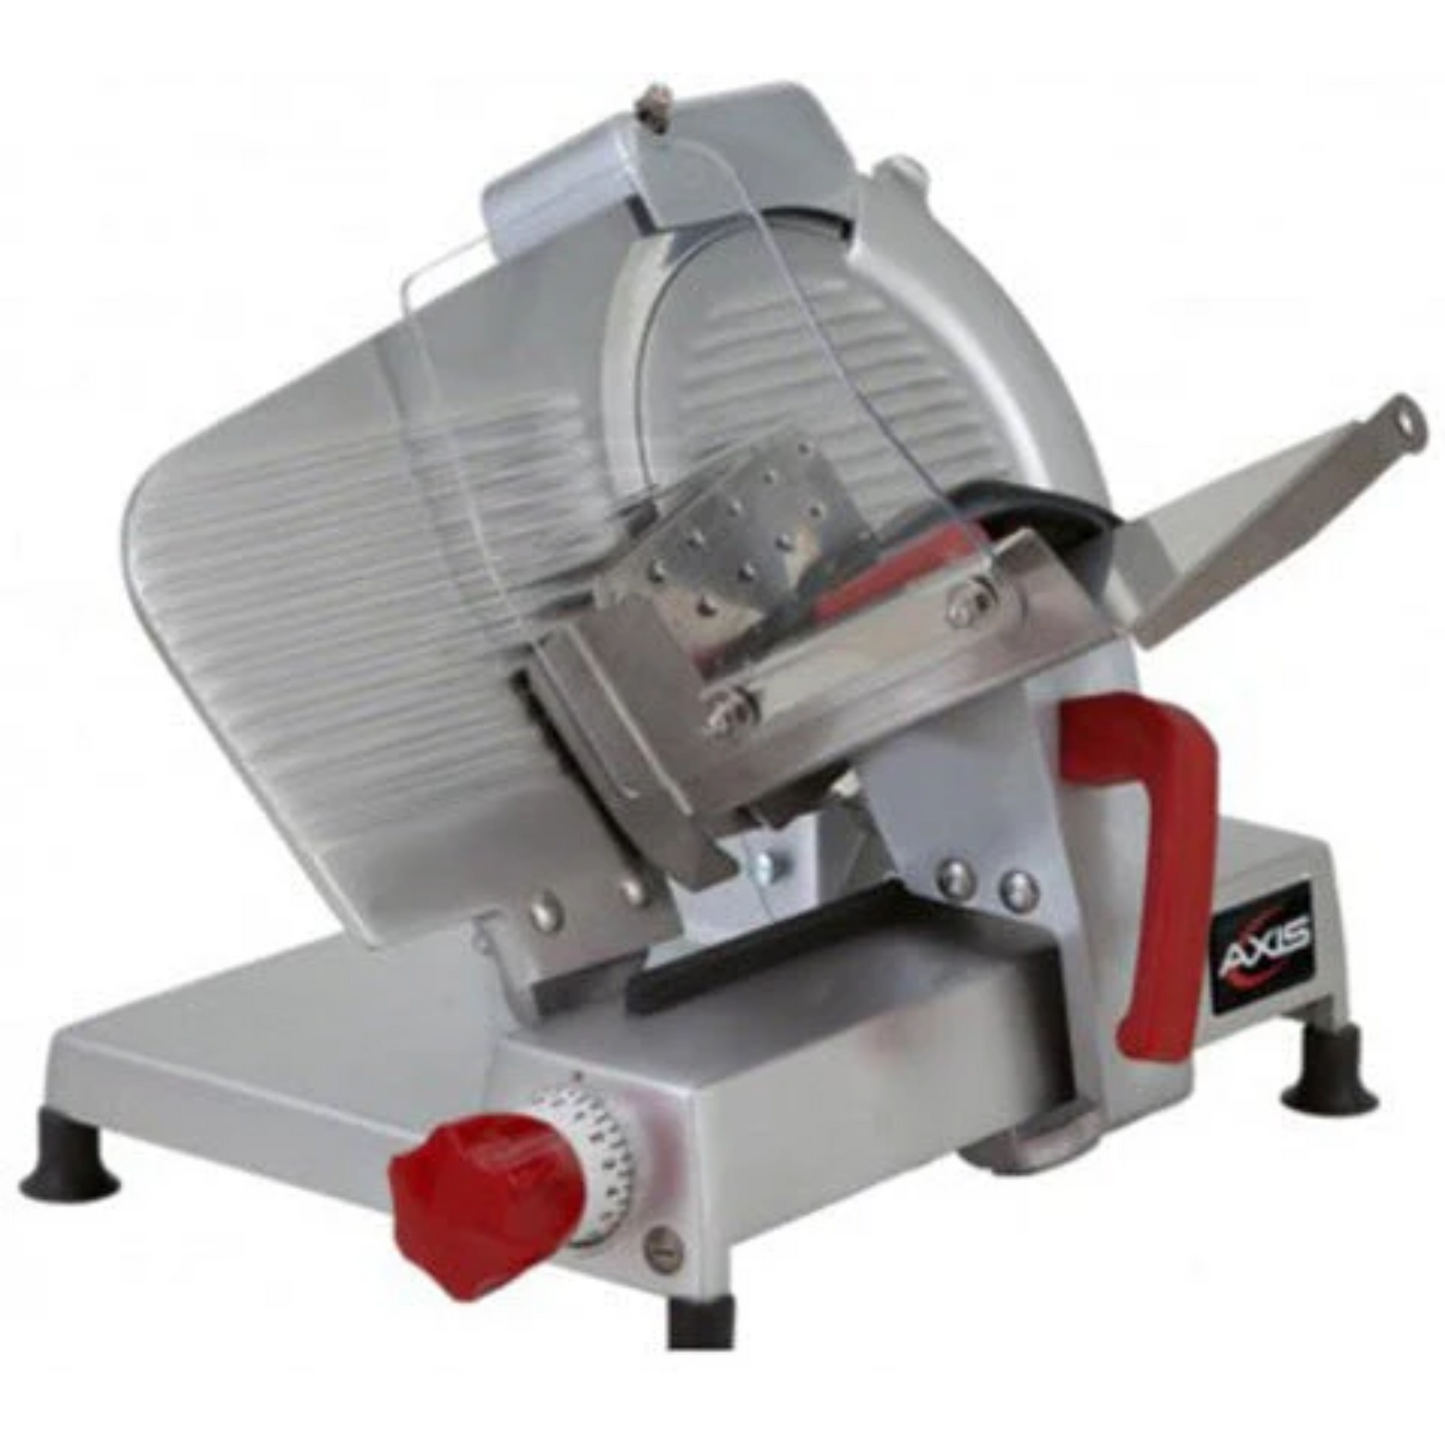 Axis AX-S12 ULTRA Manual Commercial Meat Slicer with 12" Blade, Belt Driven 1/2 HP